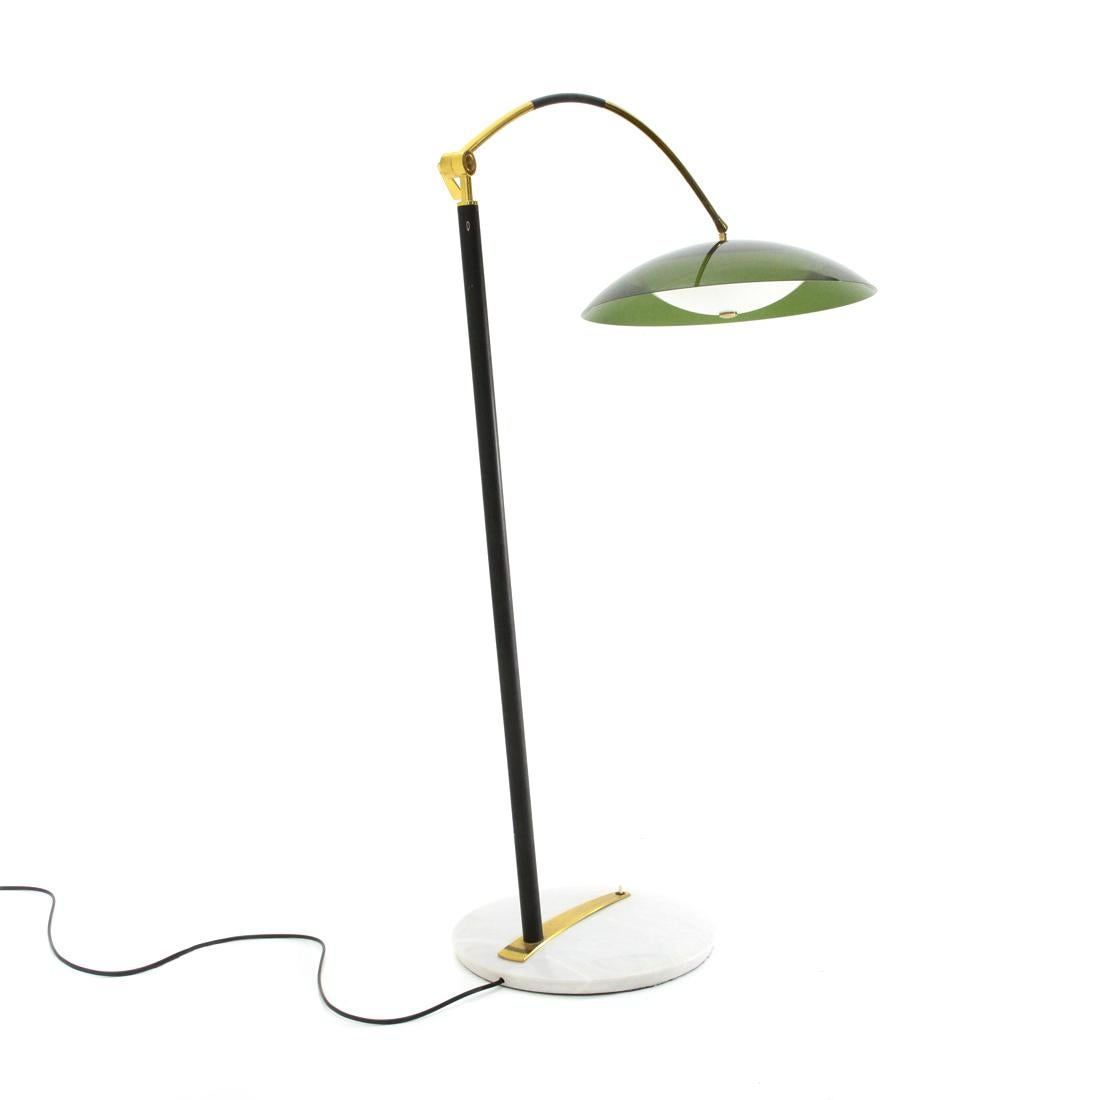 Floor lamp produced in the 1960s by Stilux.
Slightly rounded marble base, with brass element and power button.
Stem in black painted metal and brass.
Diffuser formed by two perspex elements, one white and one green.
Height adjustable.
Good